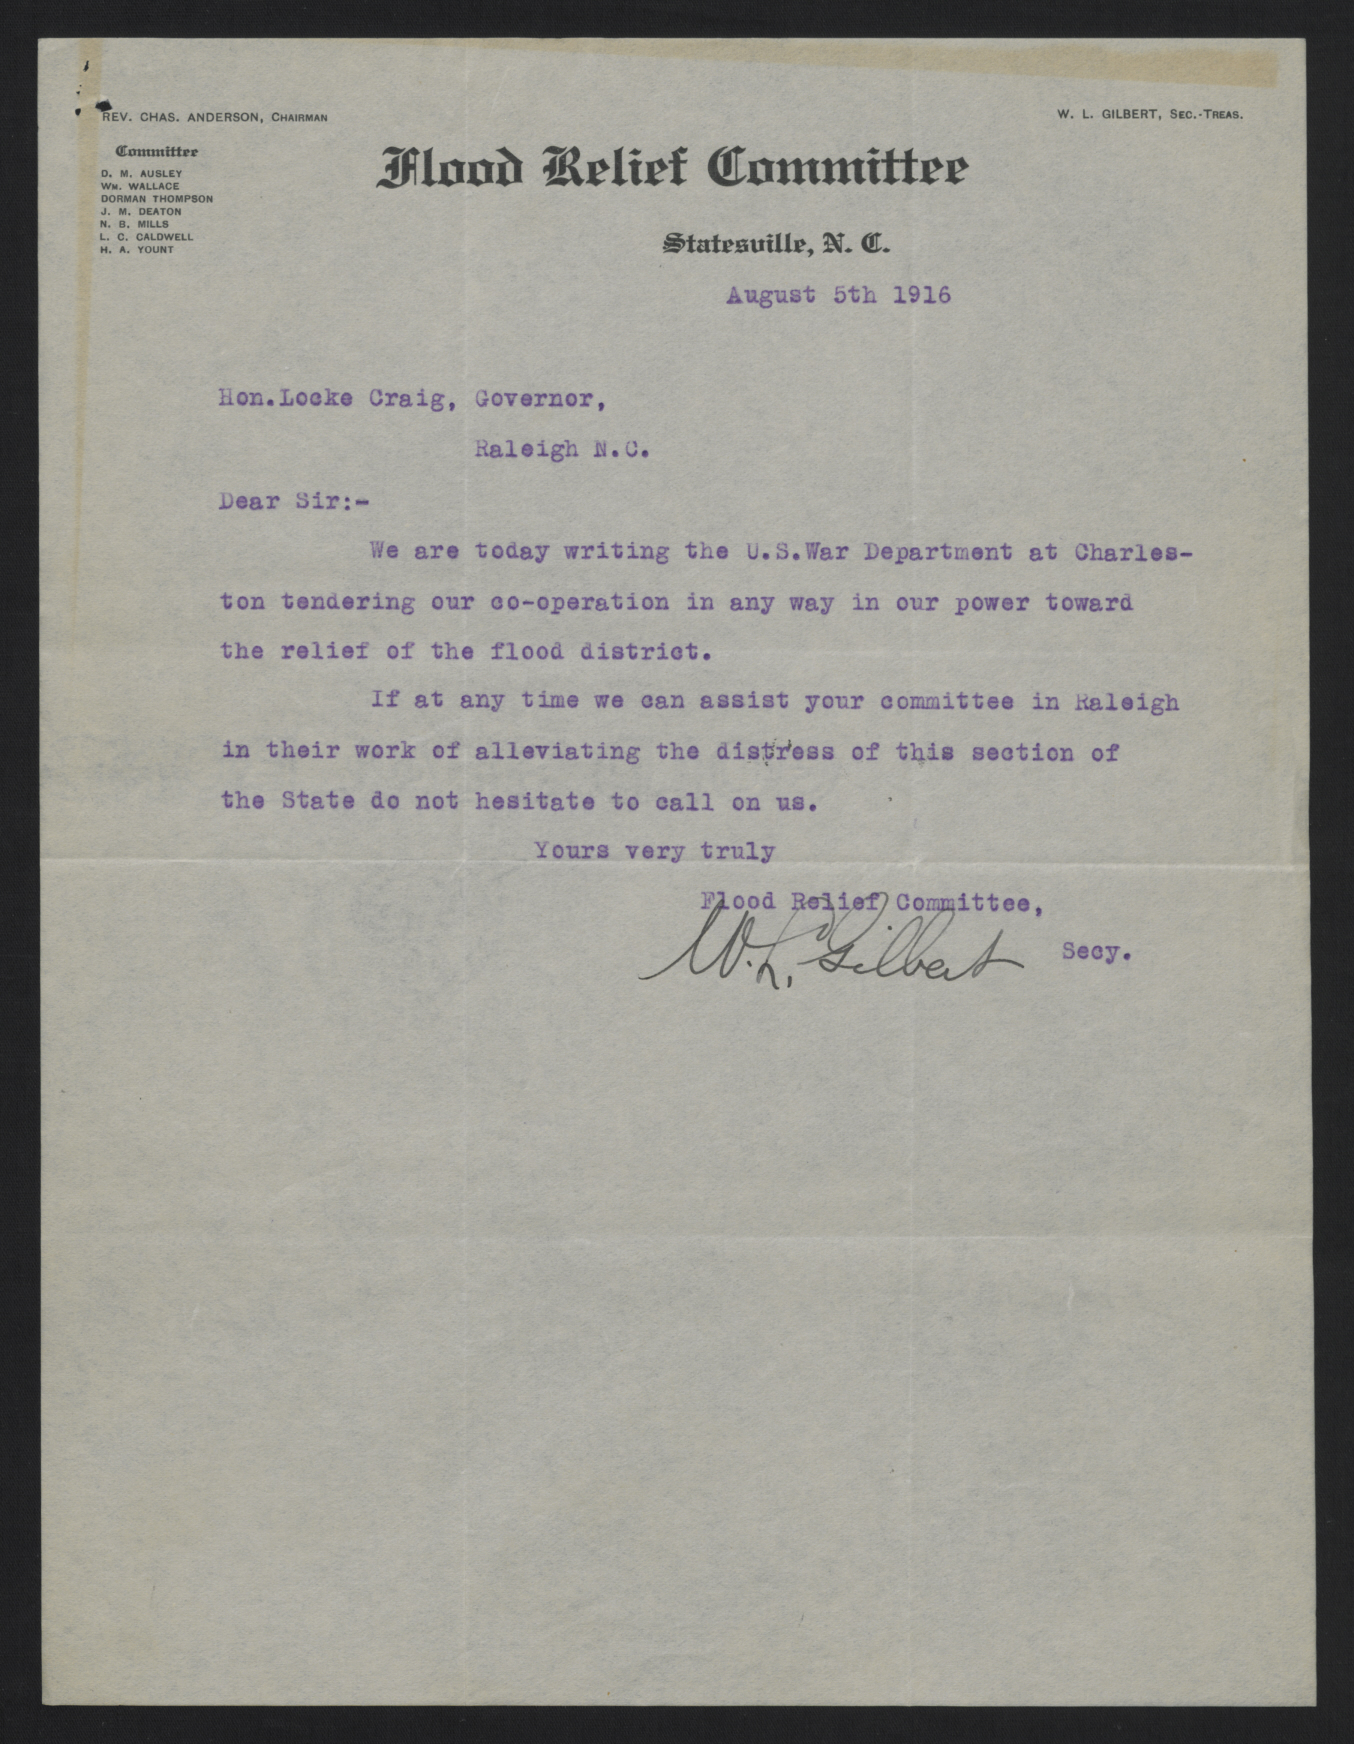 Letter from Gilbert to Craig, August 5, 1916